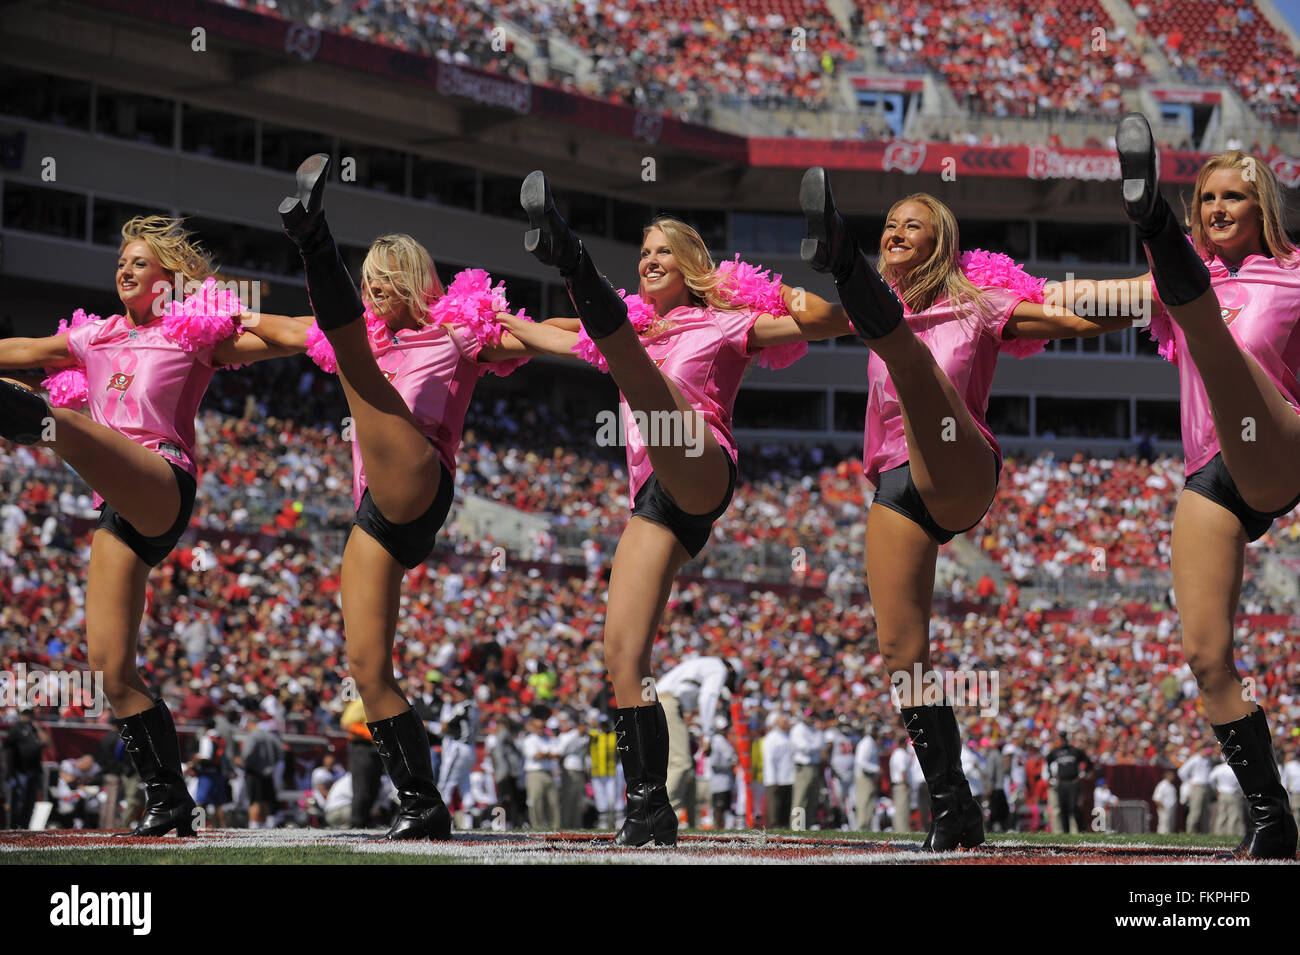 Tampa, Florida, UNITED STATES. 18th Oct, 2009. Oct 18, 2009; Tampa, FL, USA; Tampa Bay Buccaneers cheerleaders during the Bucs game against the Carolina Panthers at Raymond James Stadium. ZUMA Press/Scott A. Miller © Scott A. Miller/ZUMA Wire/Alamy Live News Stock Photo